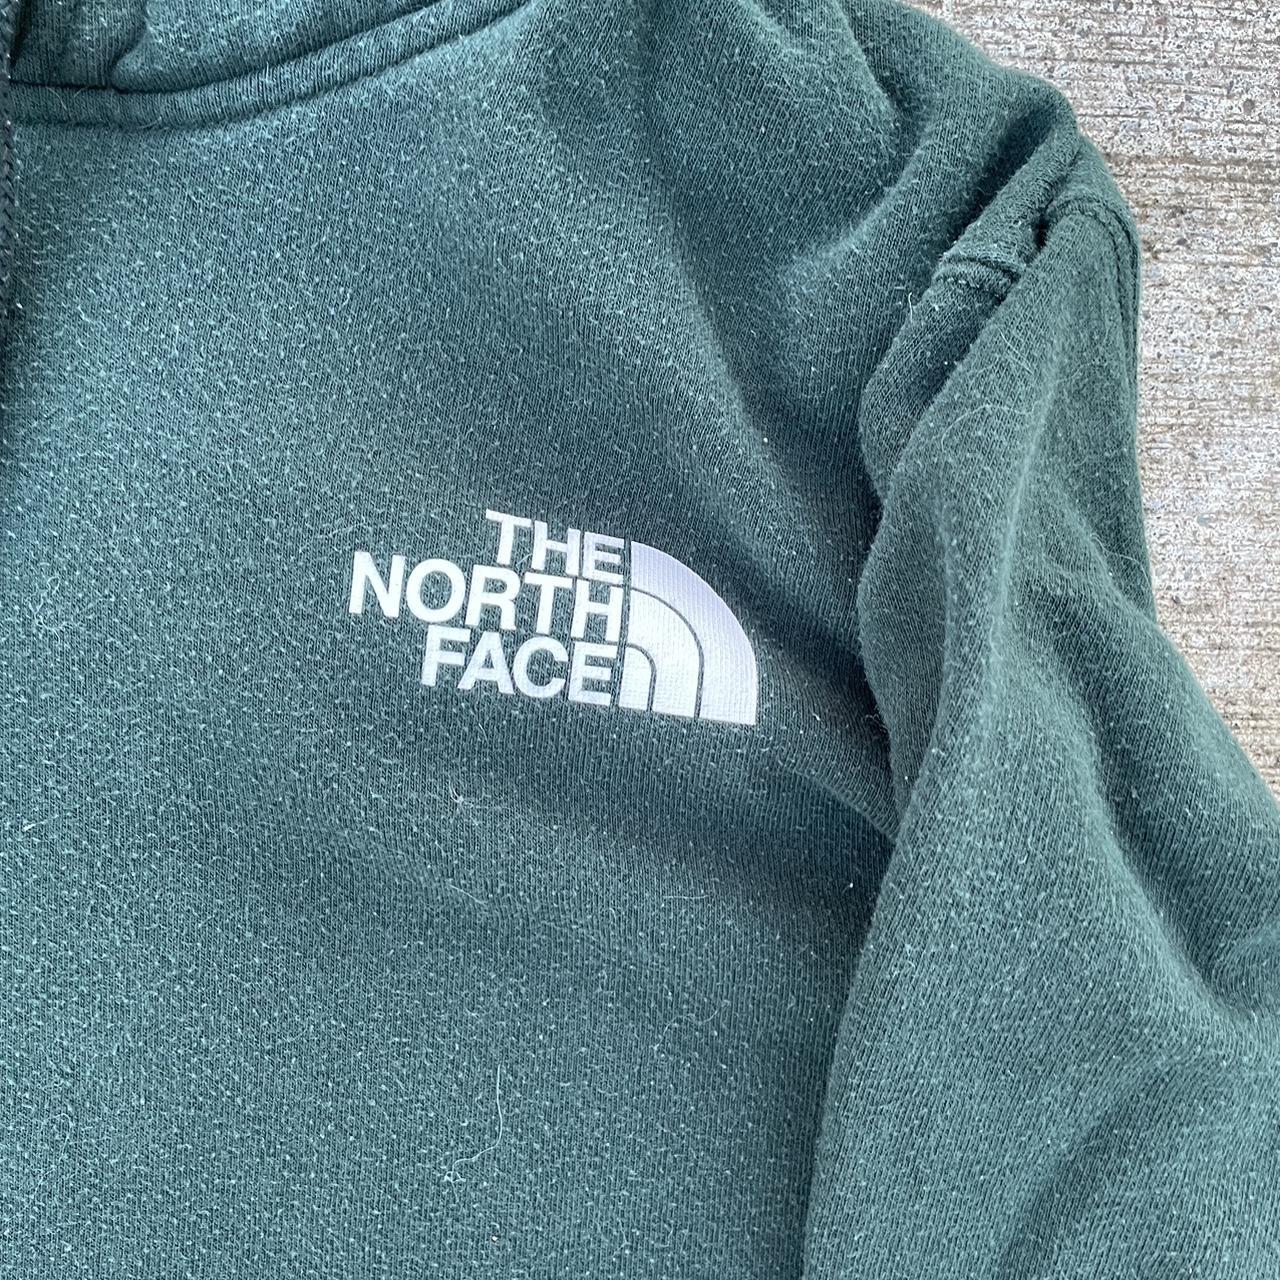 The North Face Men's Green Hoodie (2)